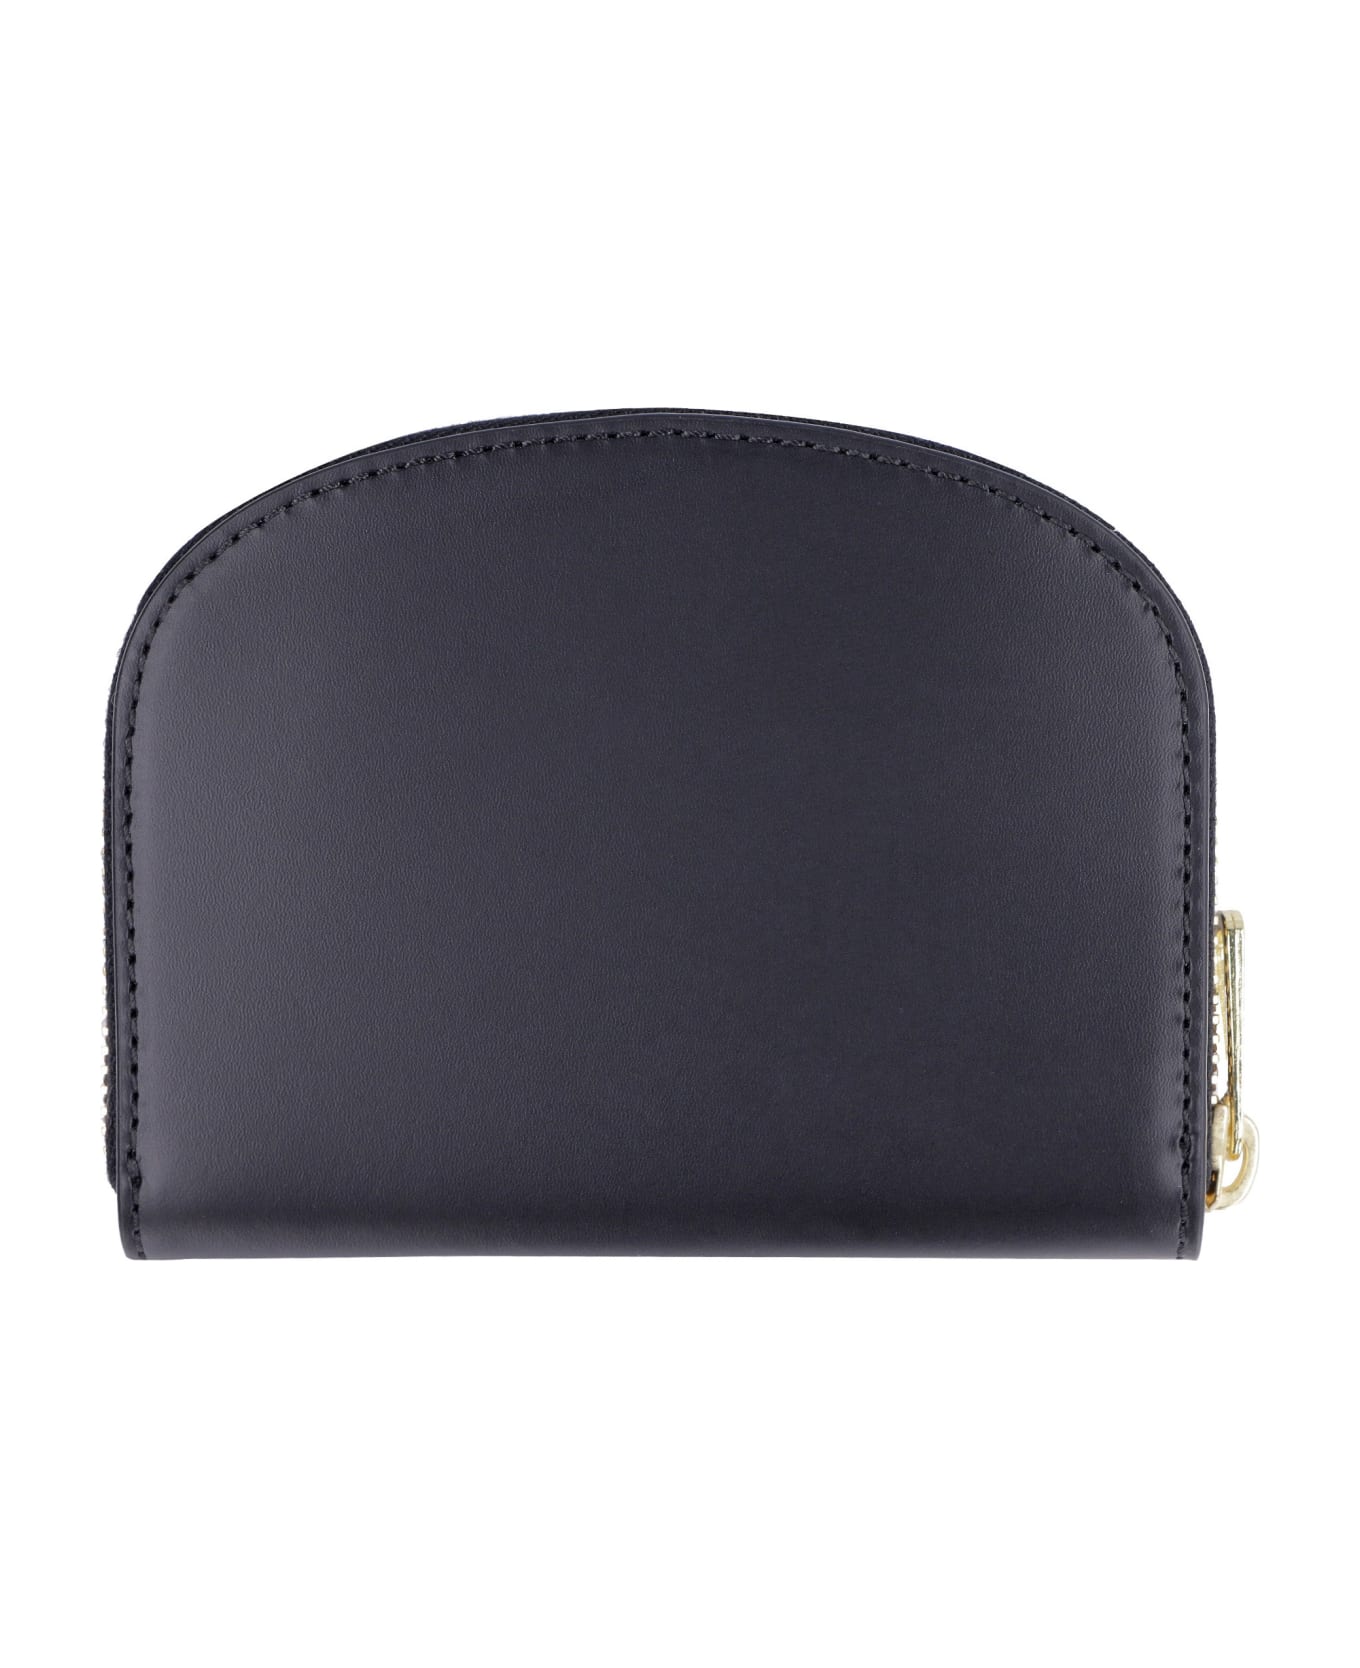 A.P.C. Small Leather Flap-over Wallet - black